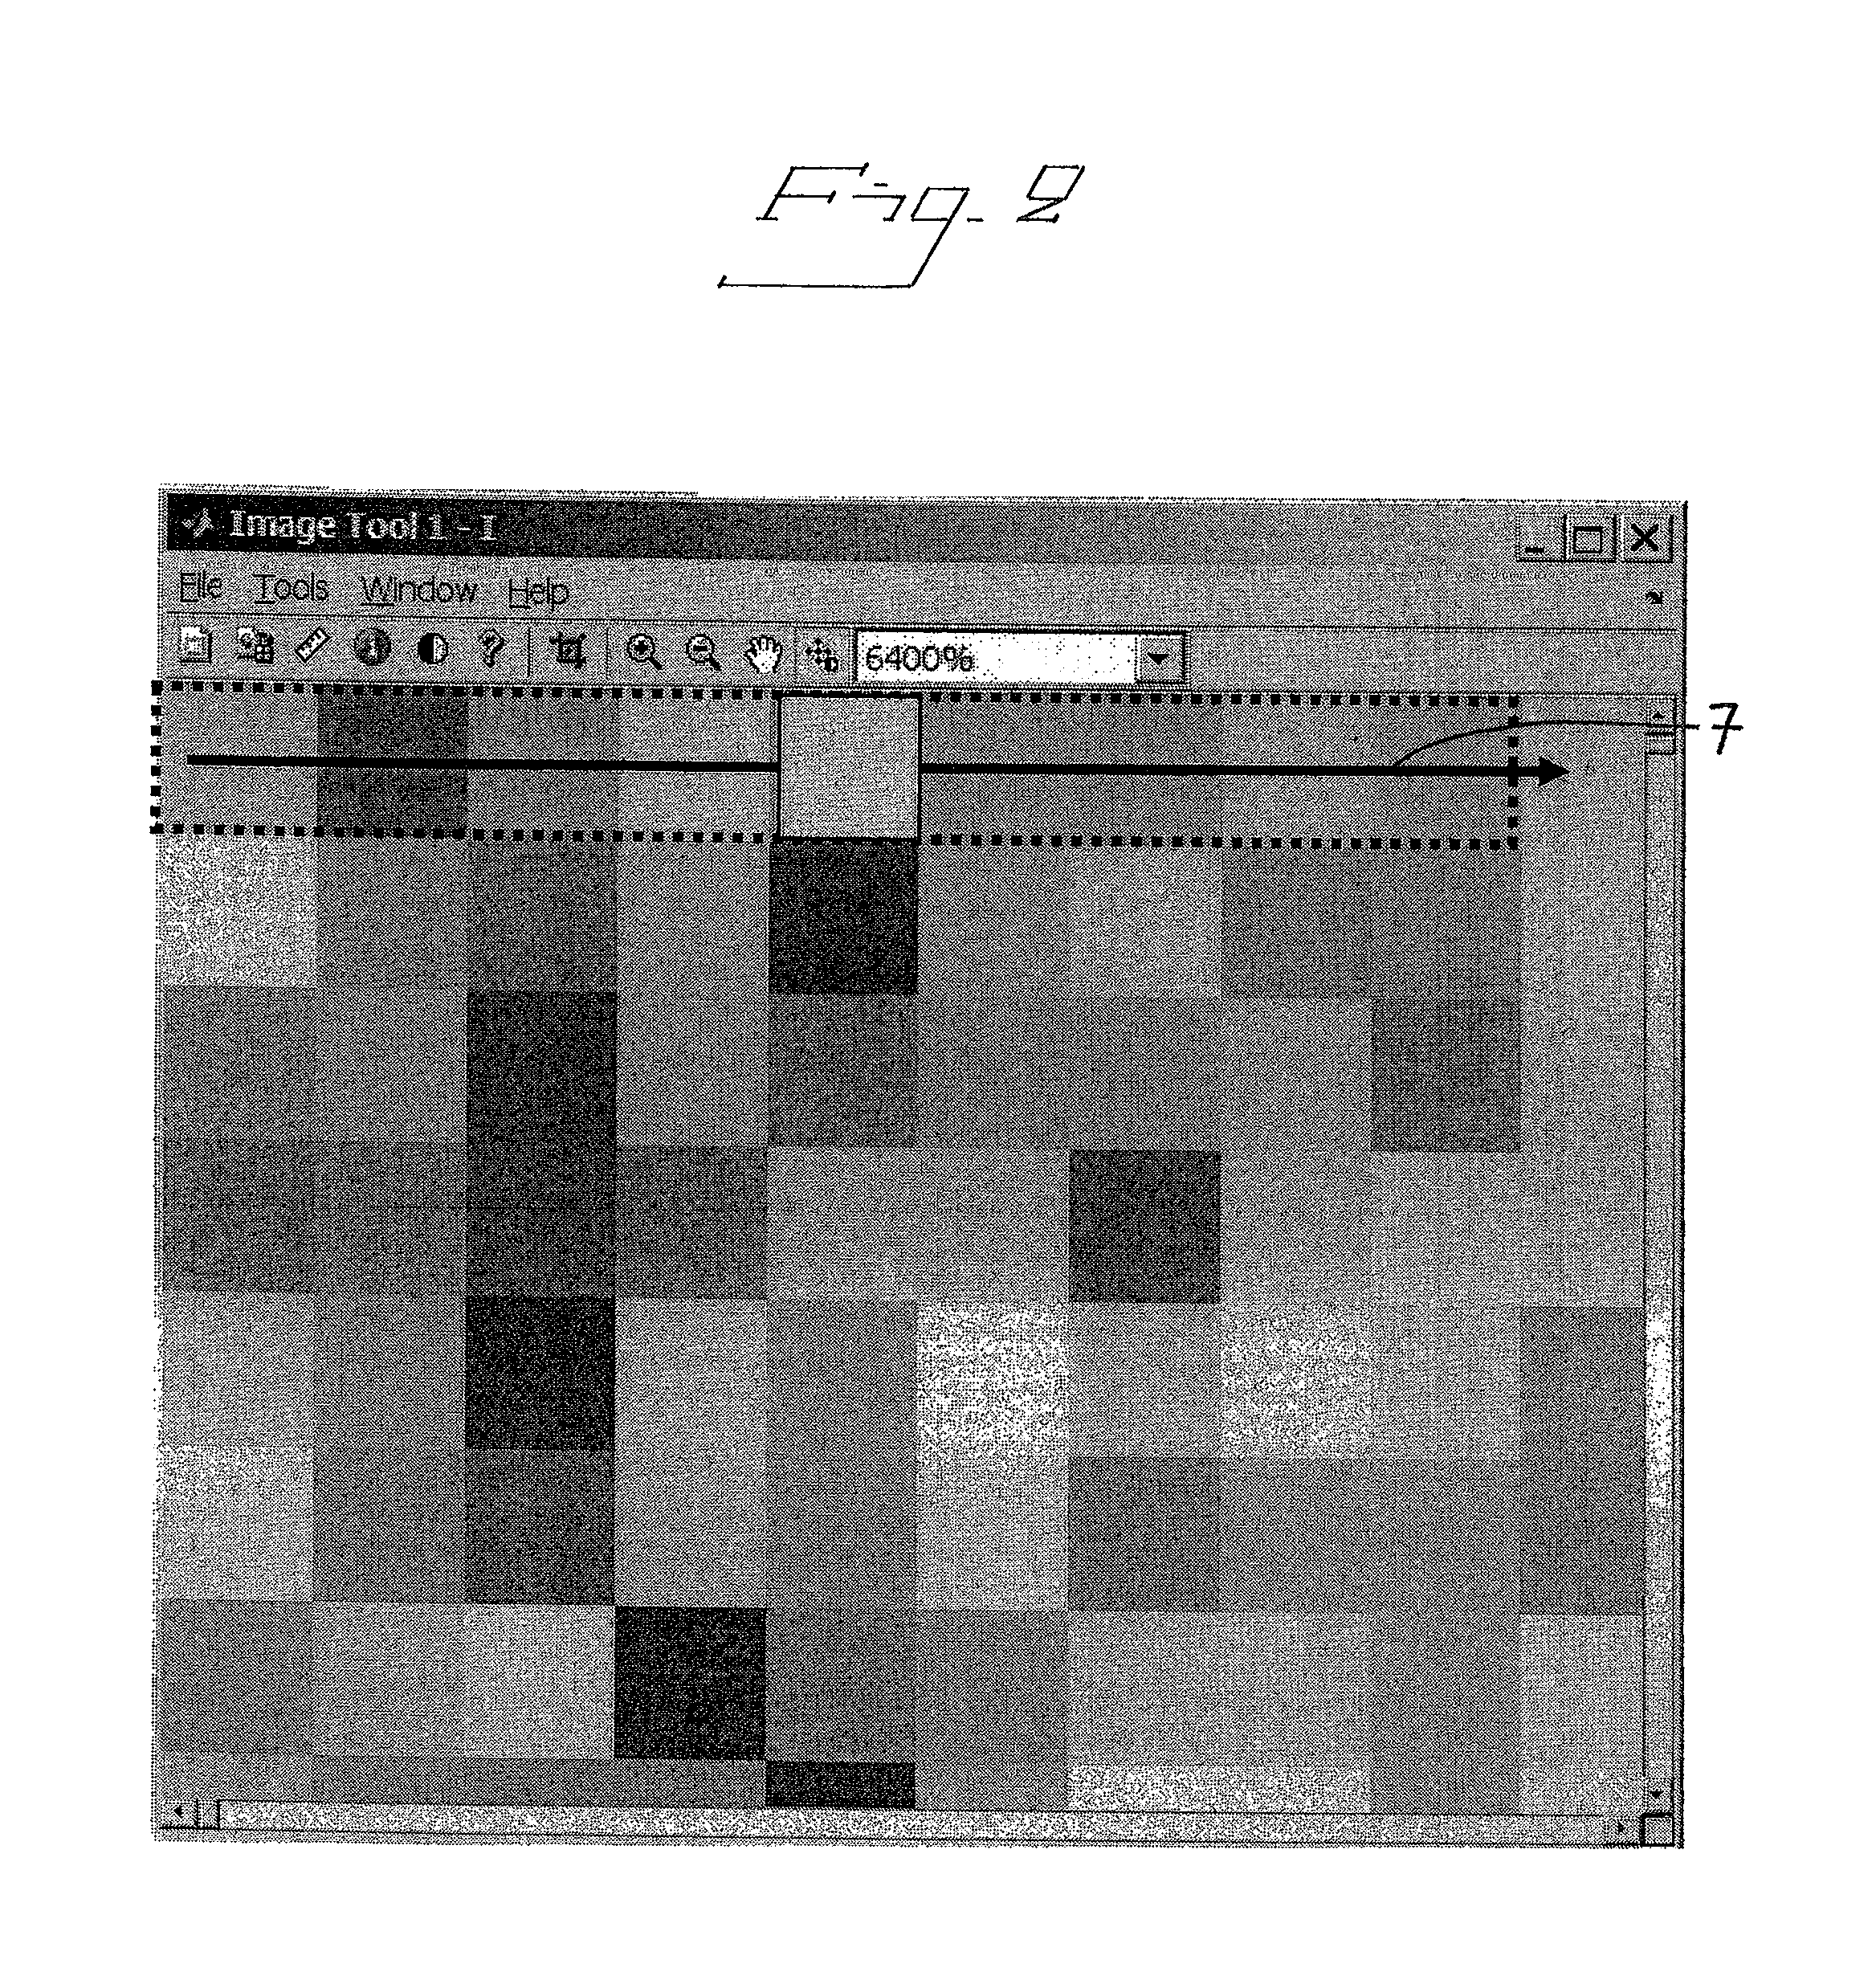 Image processing method for suppressing spatio-temporal column or row noise